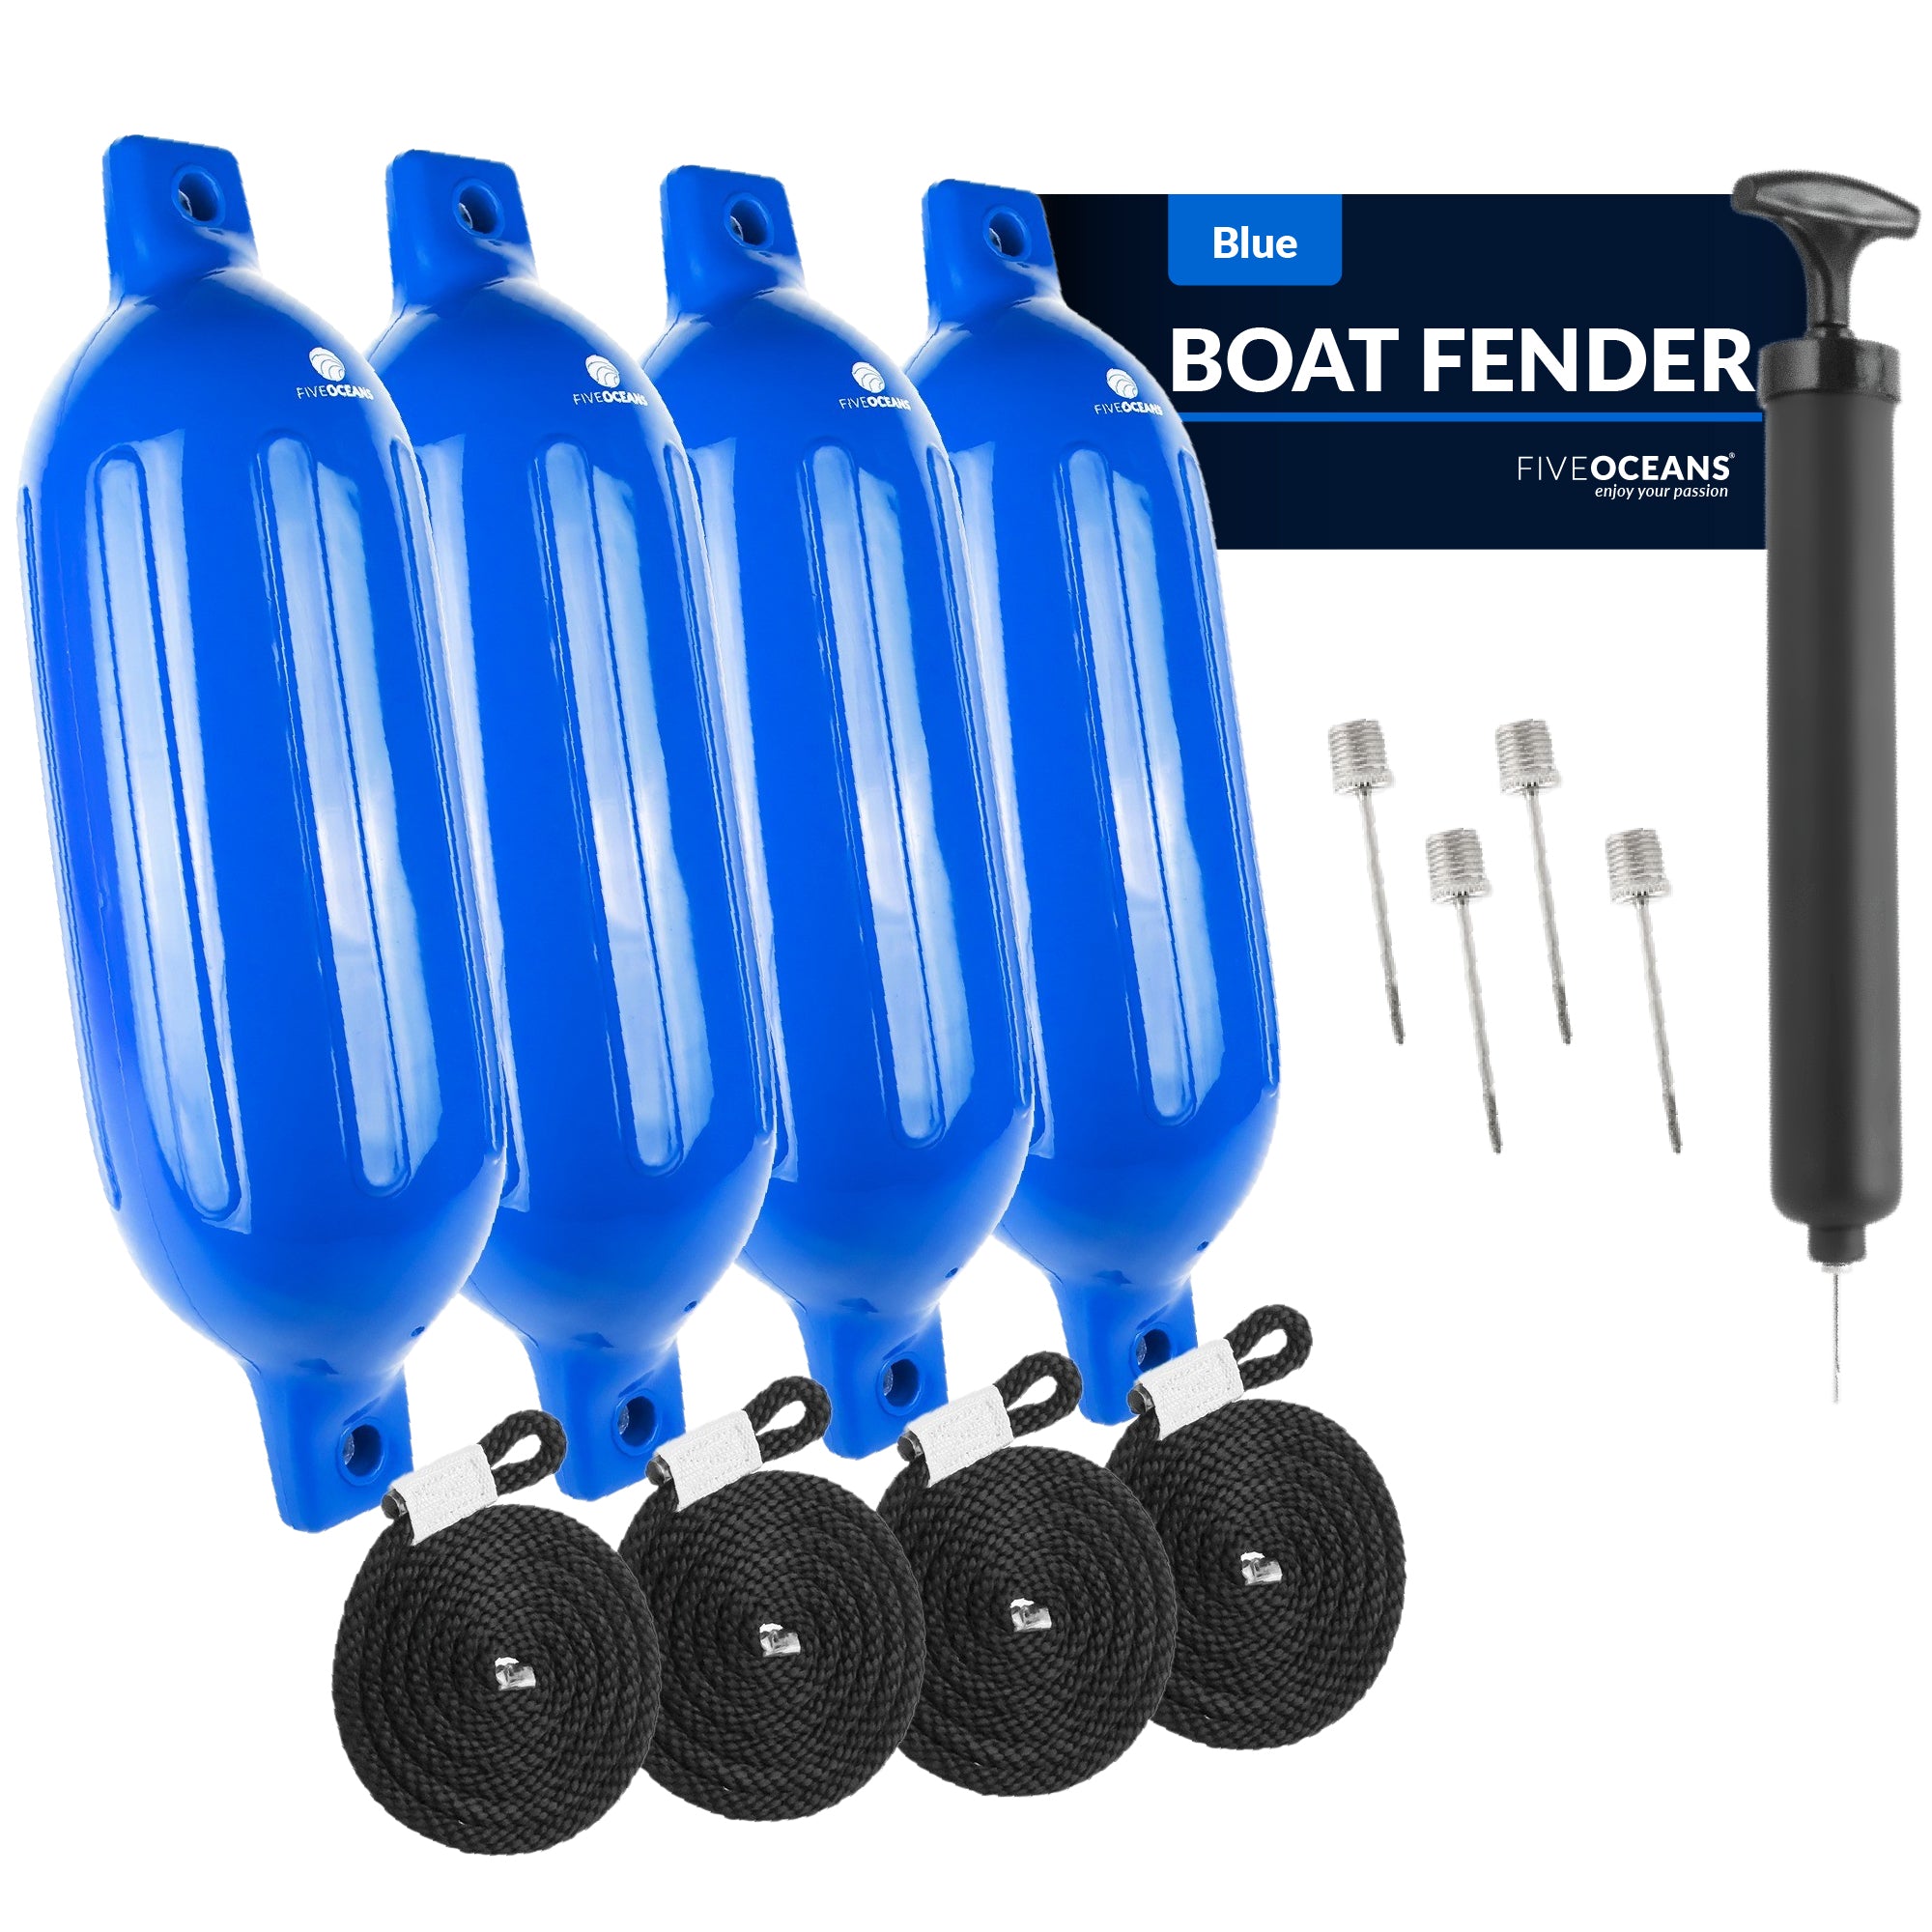 Boat Fenders, 4 Pack Blue 6.5x23" - FO4542